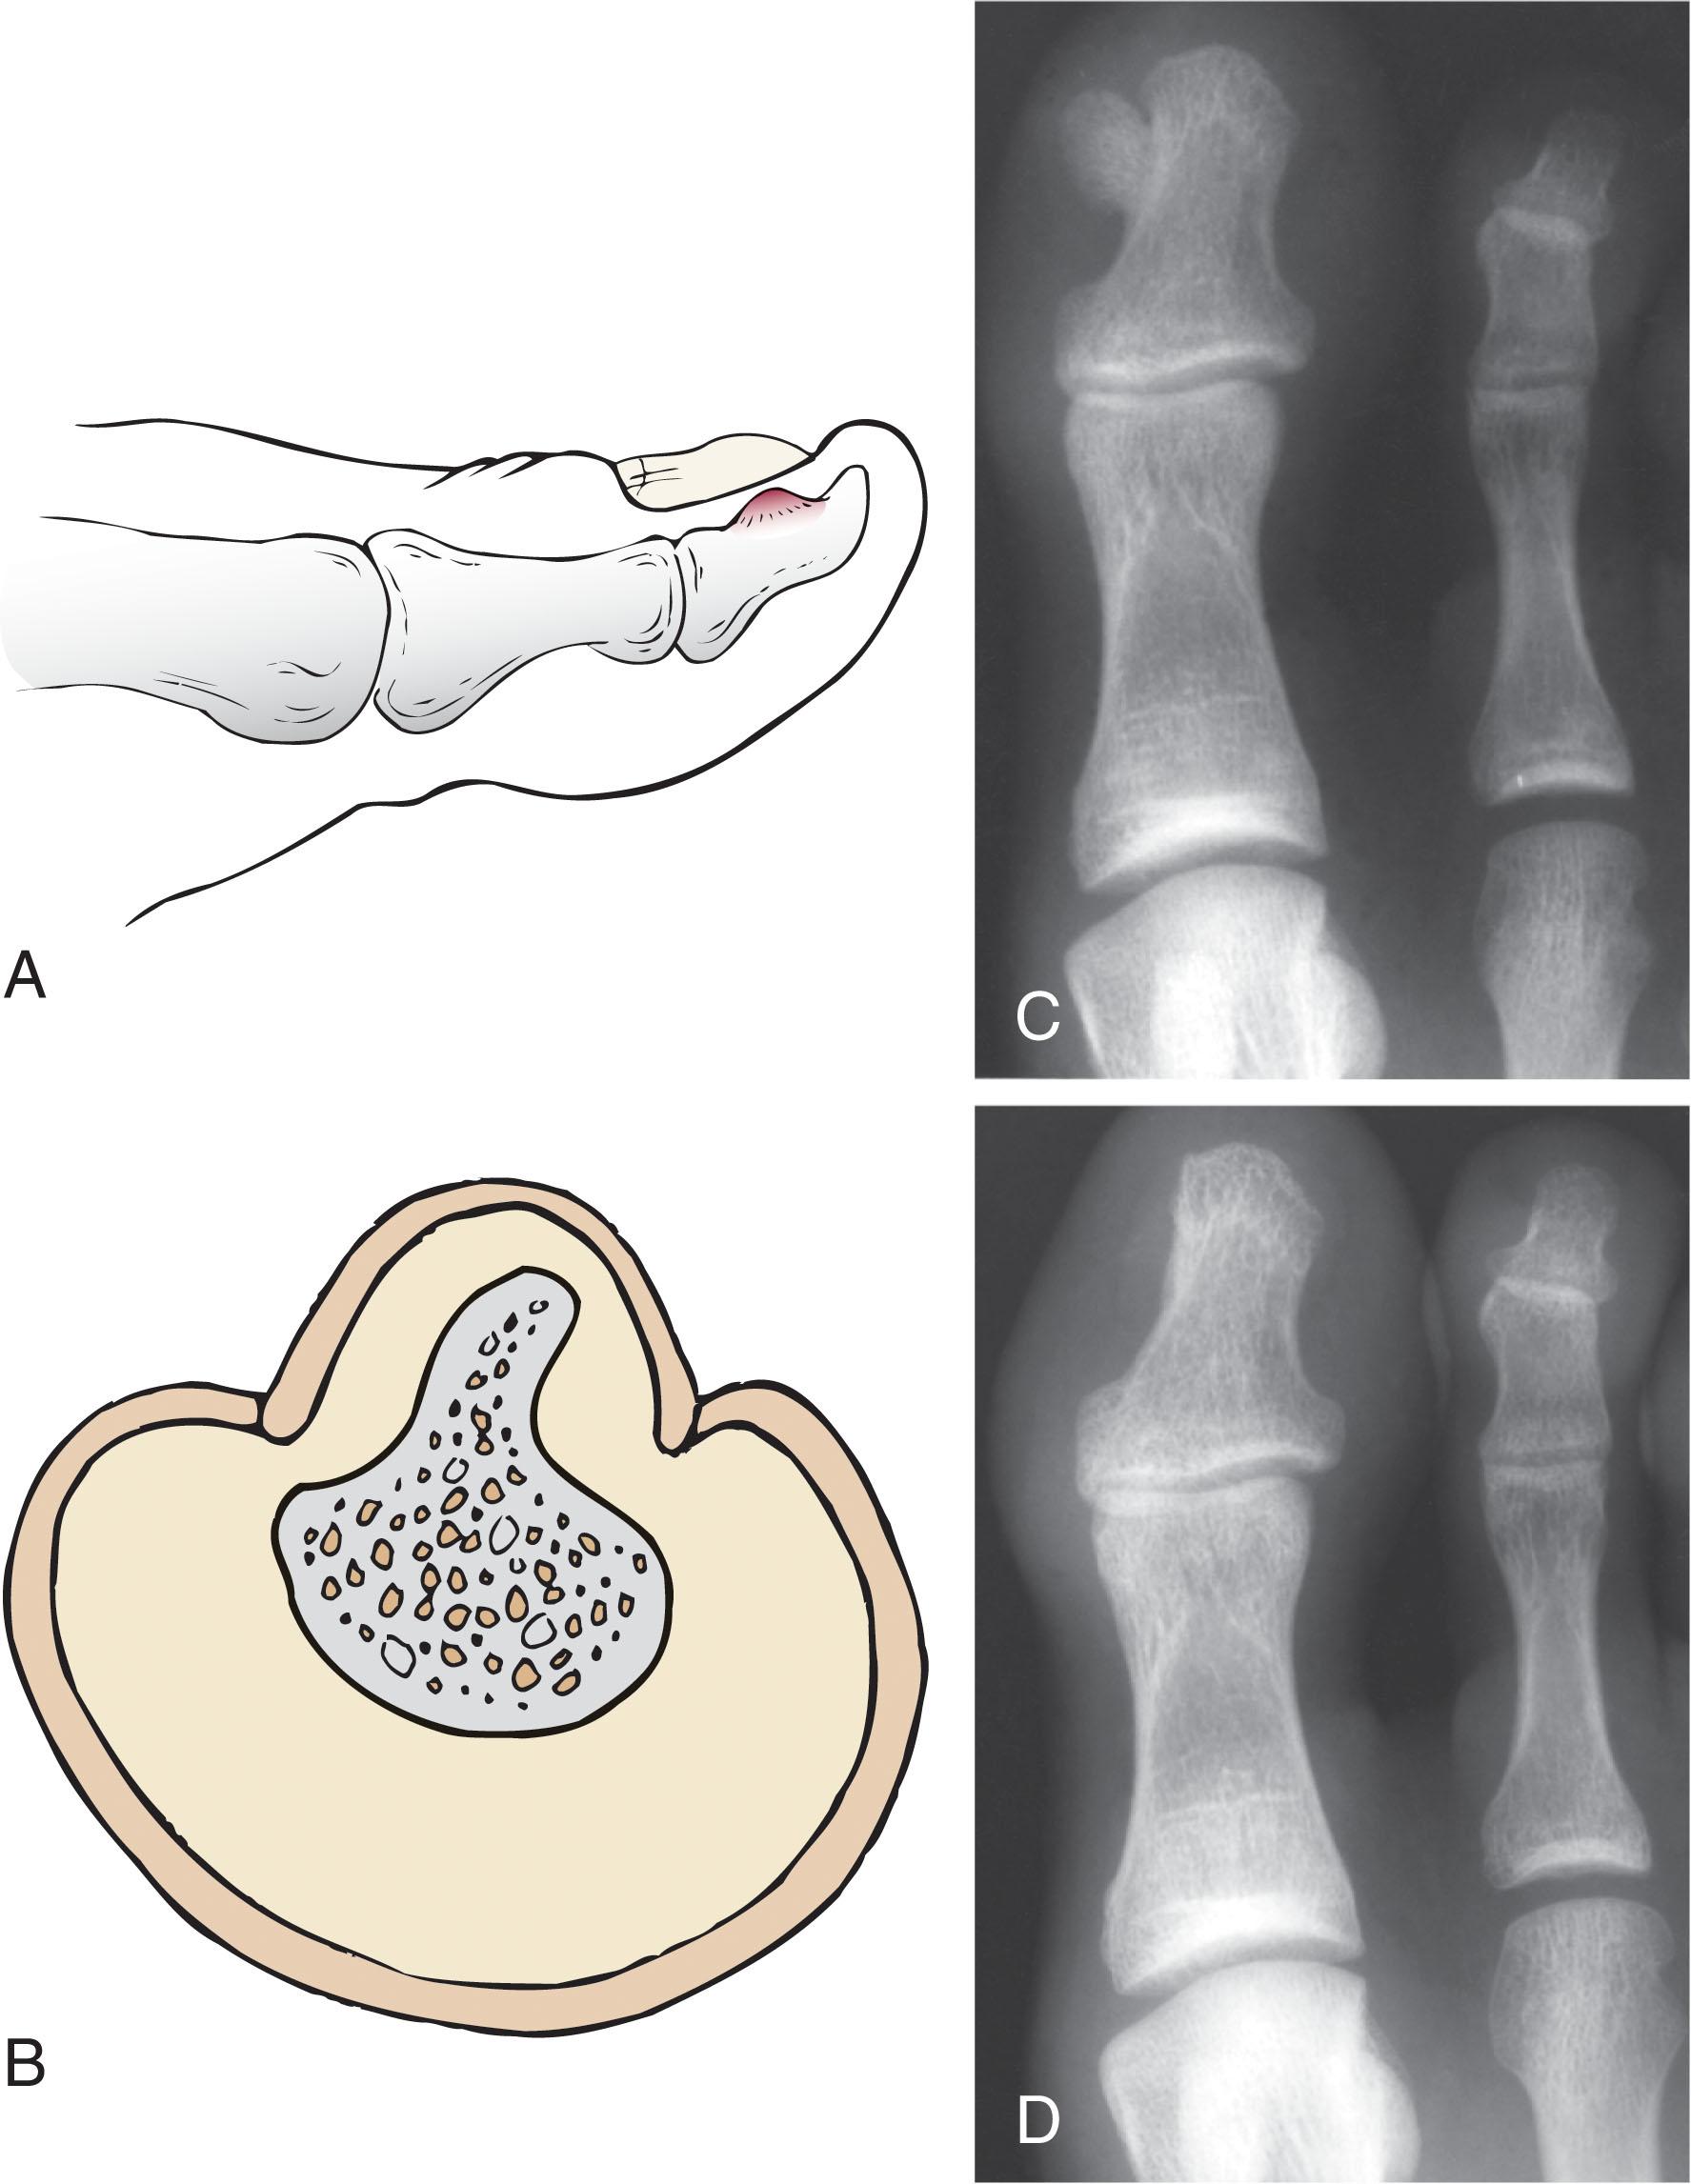 Fig. 14-15, A , Lateral view of toe shows the effect of subungual exostosis on the configuration of the nail plate. B , Cross section of distal phalanx shows deformation of the nail plate by subungual exostosis. C , Radiograph shows subungual exostosis before excision. D , Radiograph after excision of exostosis.